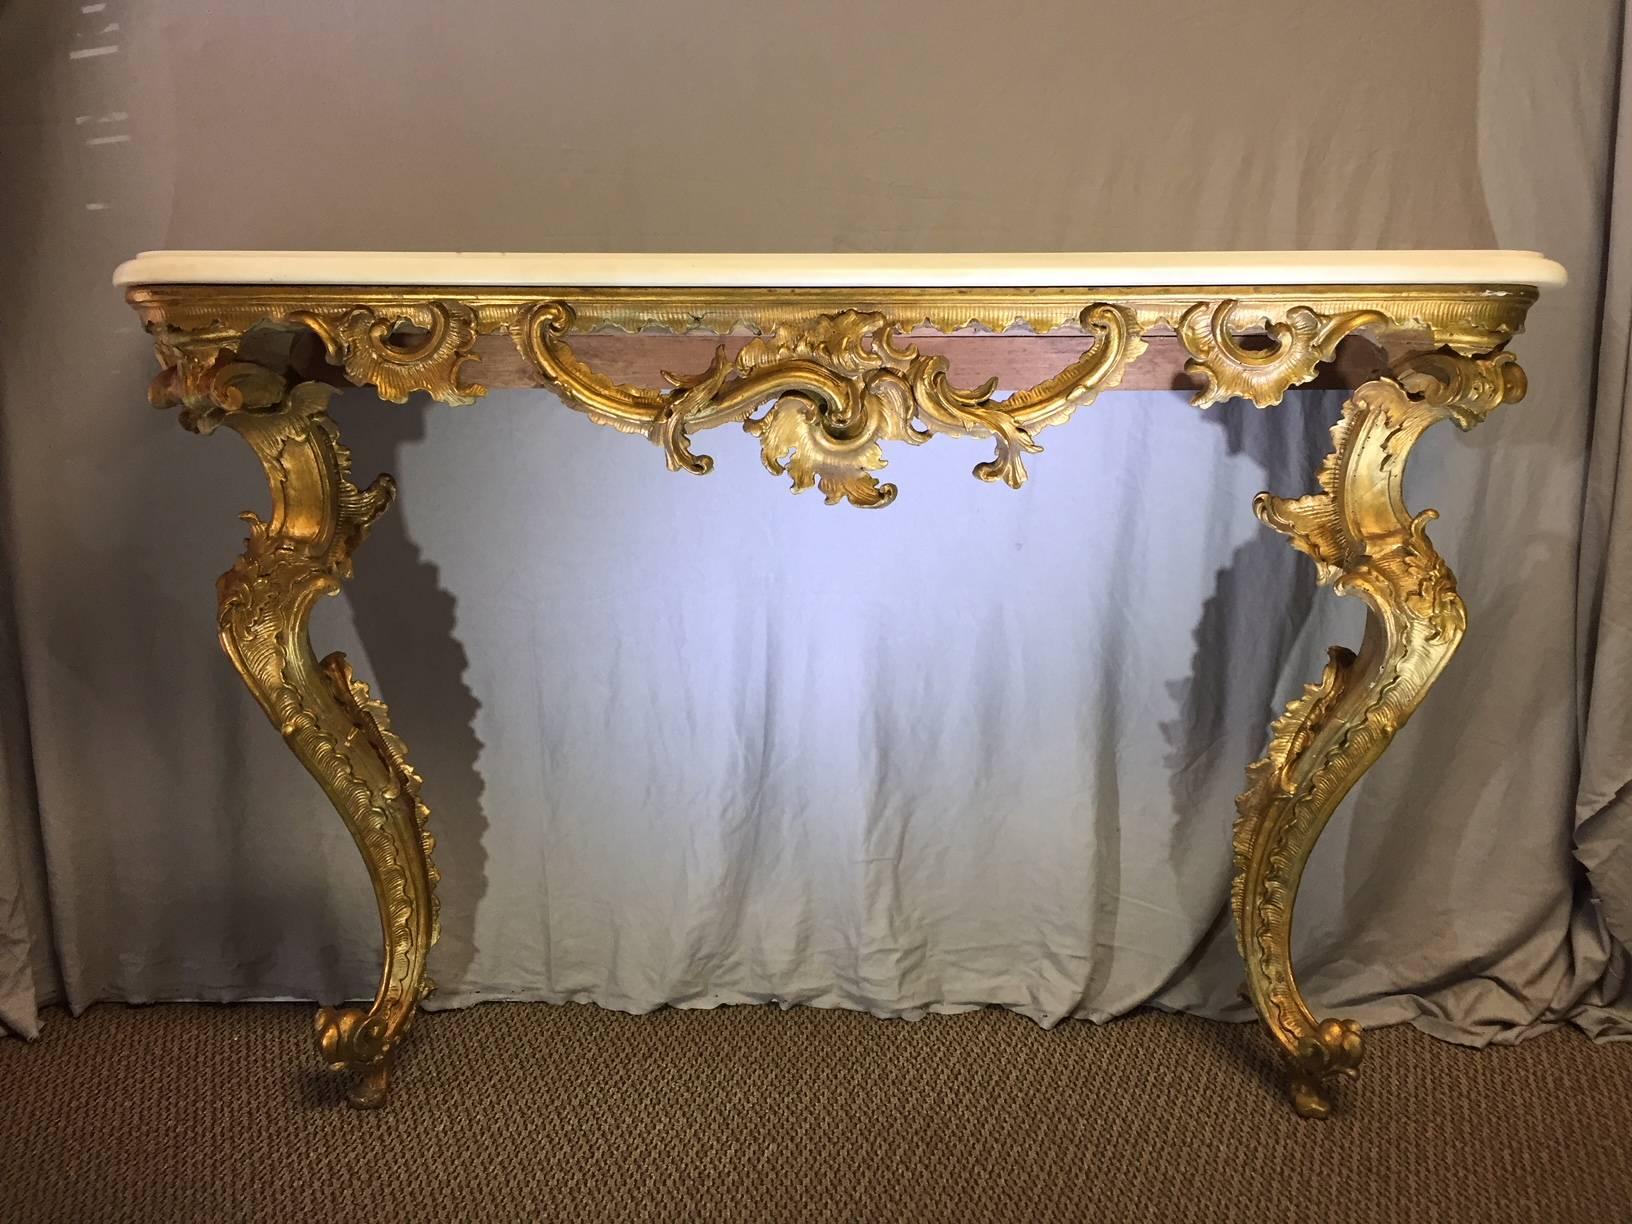 Imposing 18th century Italian Rococo giltwood console. Solid white marble top over hand-carved giltwood console with Rocaille shell and foliage motif, resting on two beautiful carved giltwood scrolled legs.